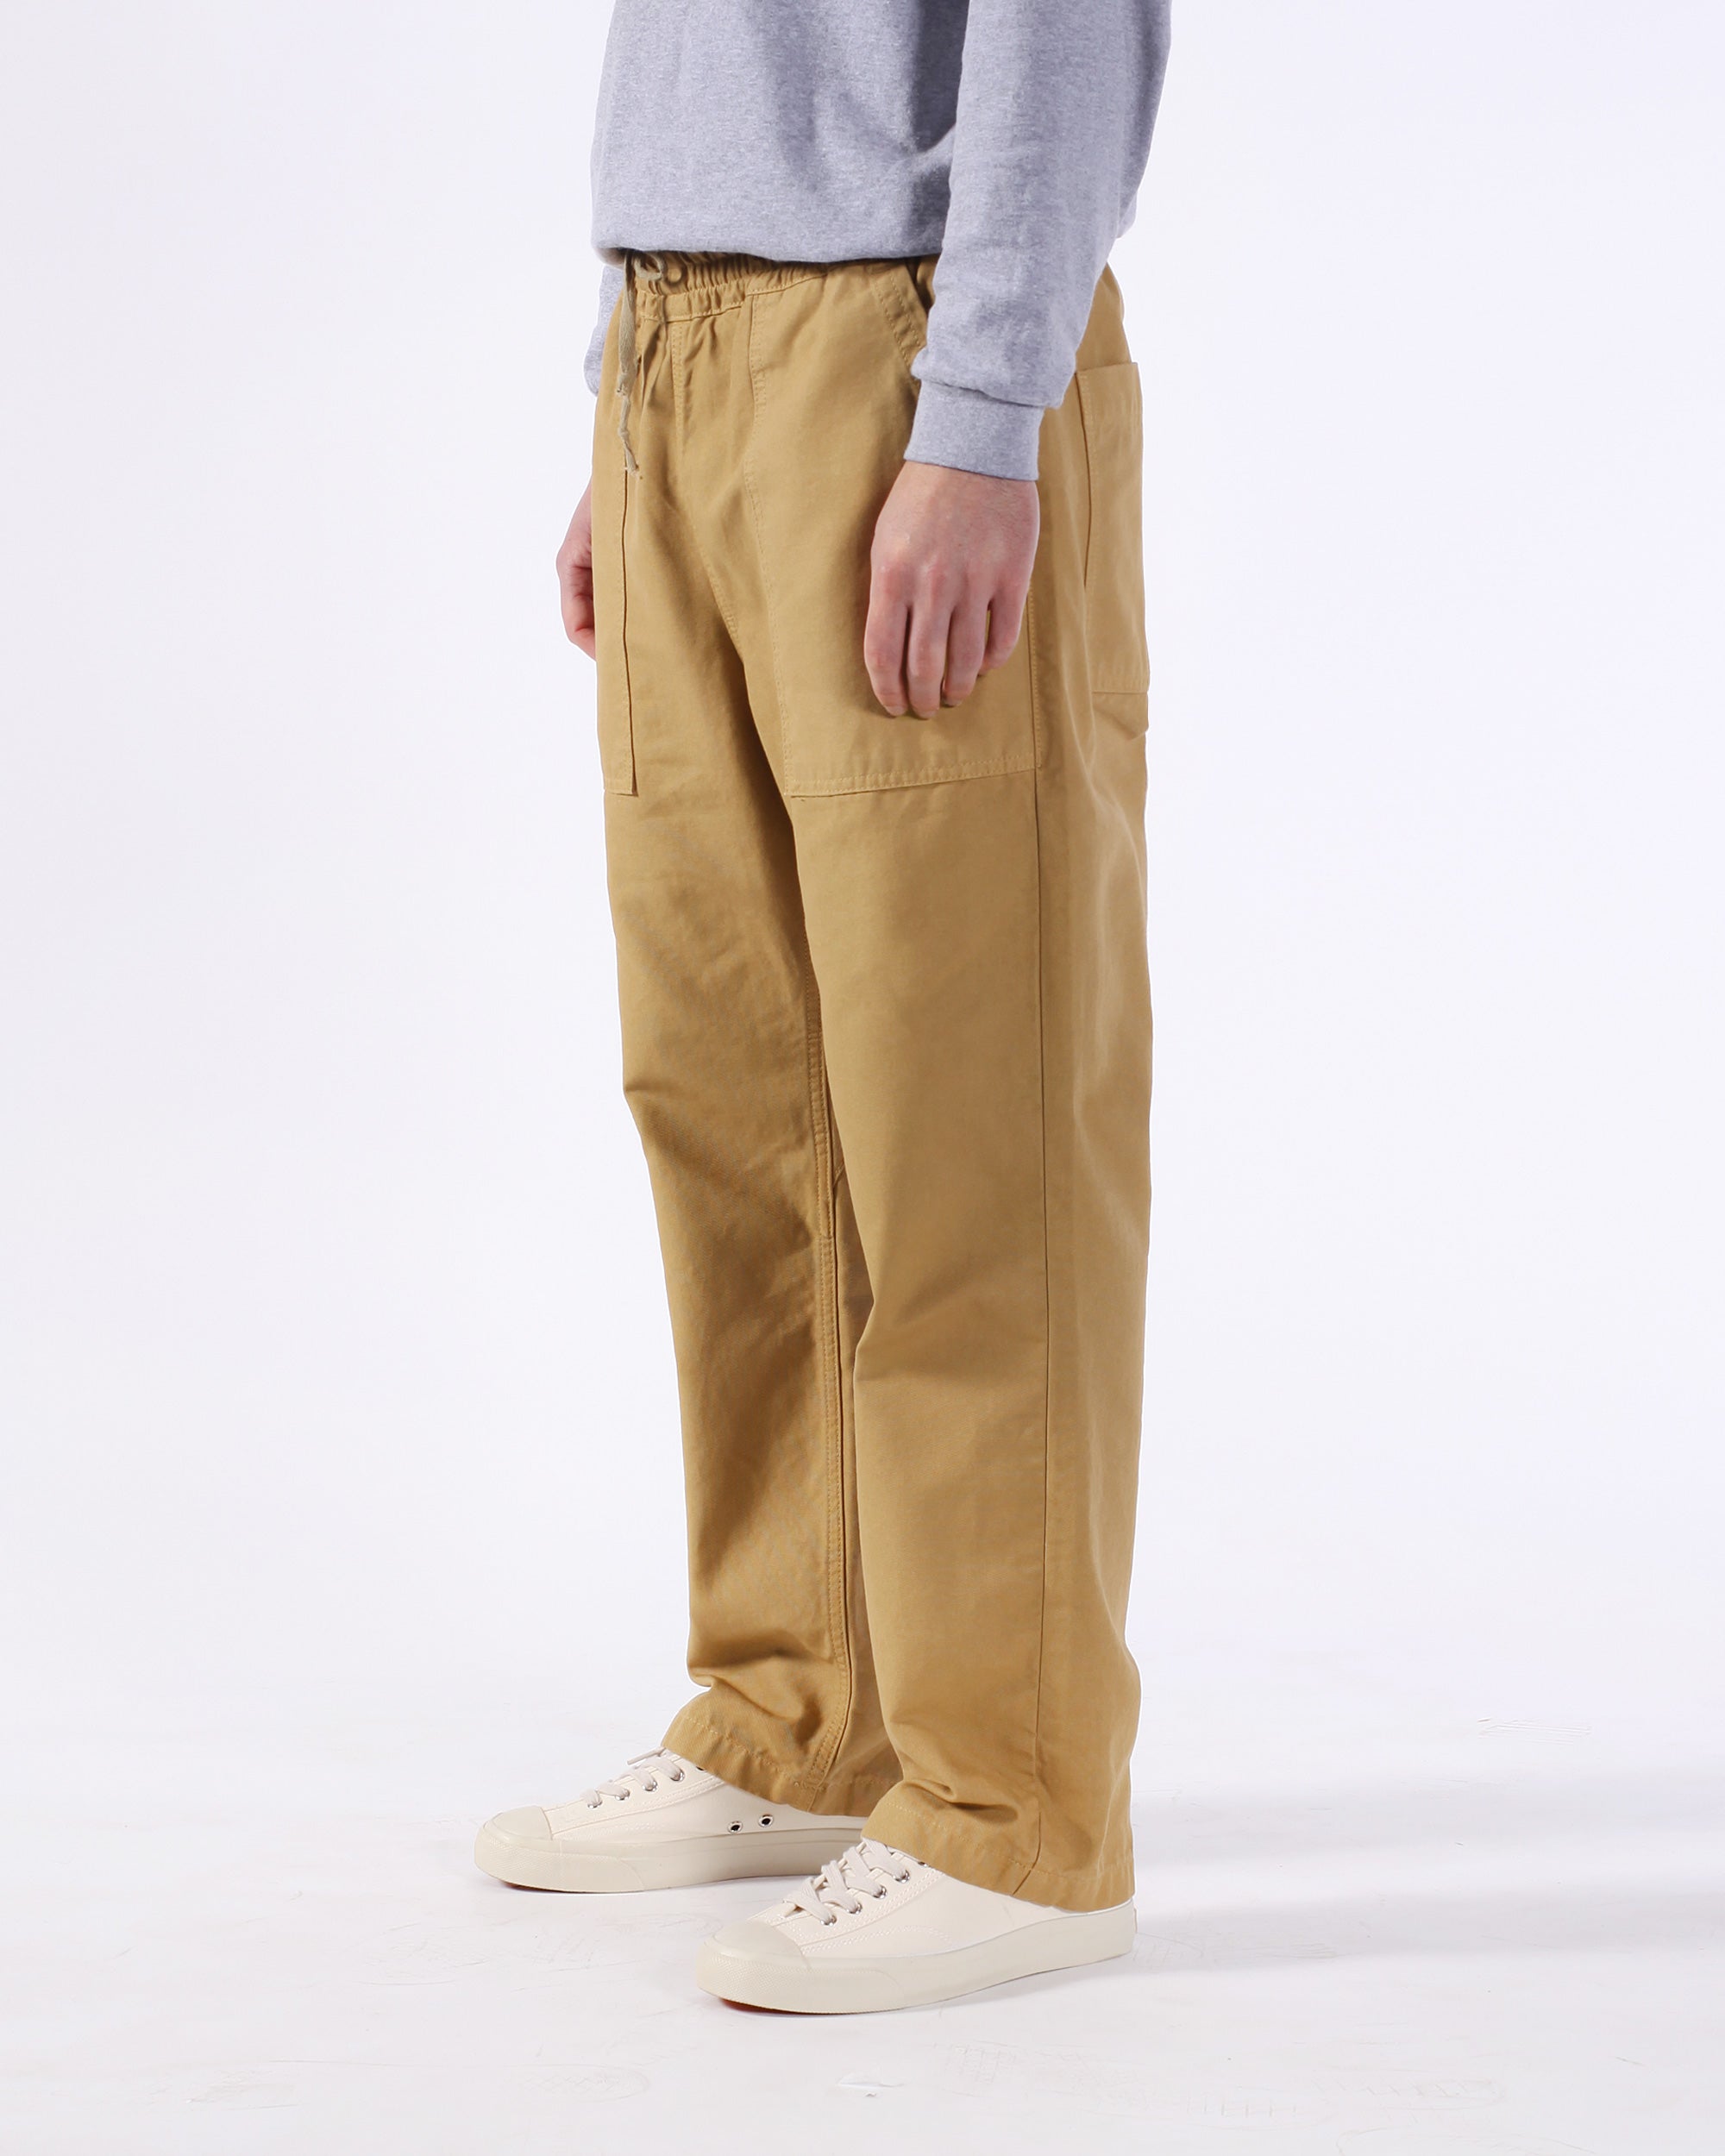 Yarmo Sailcloth Trousers  Traditional Cotton Canvas Trousers  Spinnaker  Chandlery